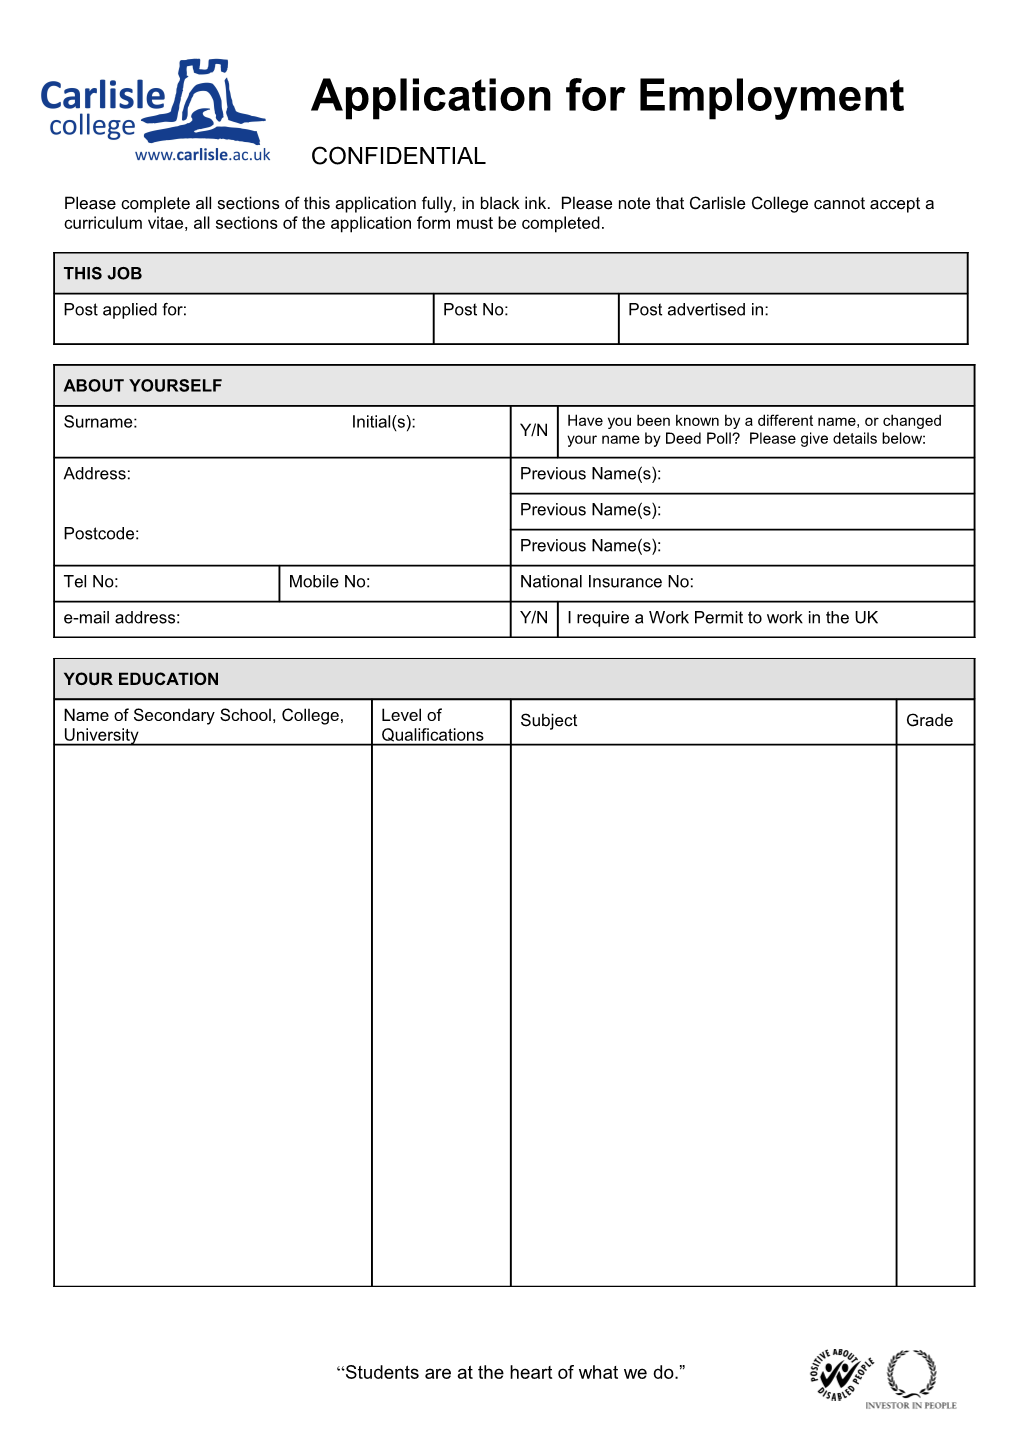 Application for Employment s31